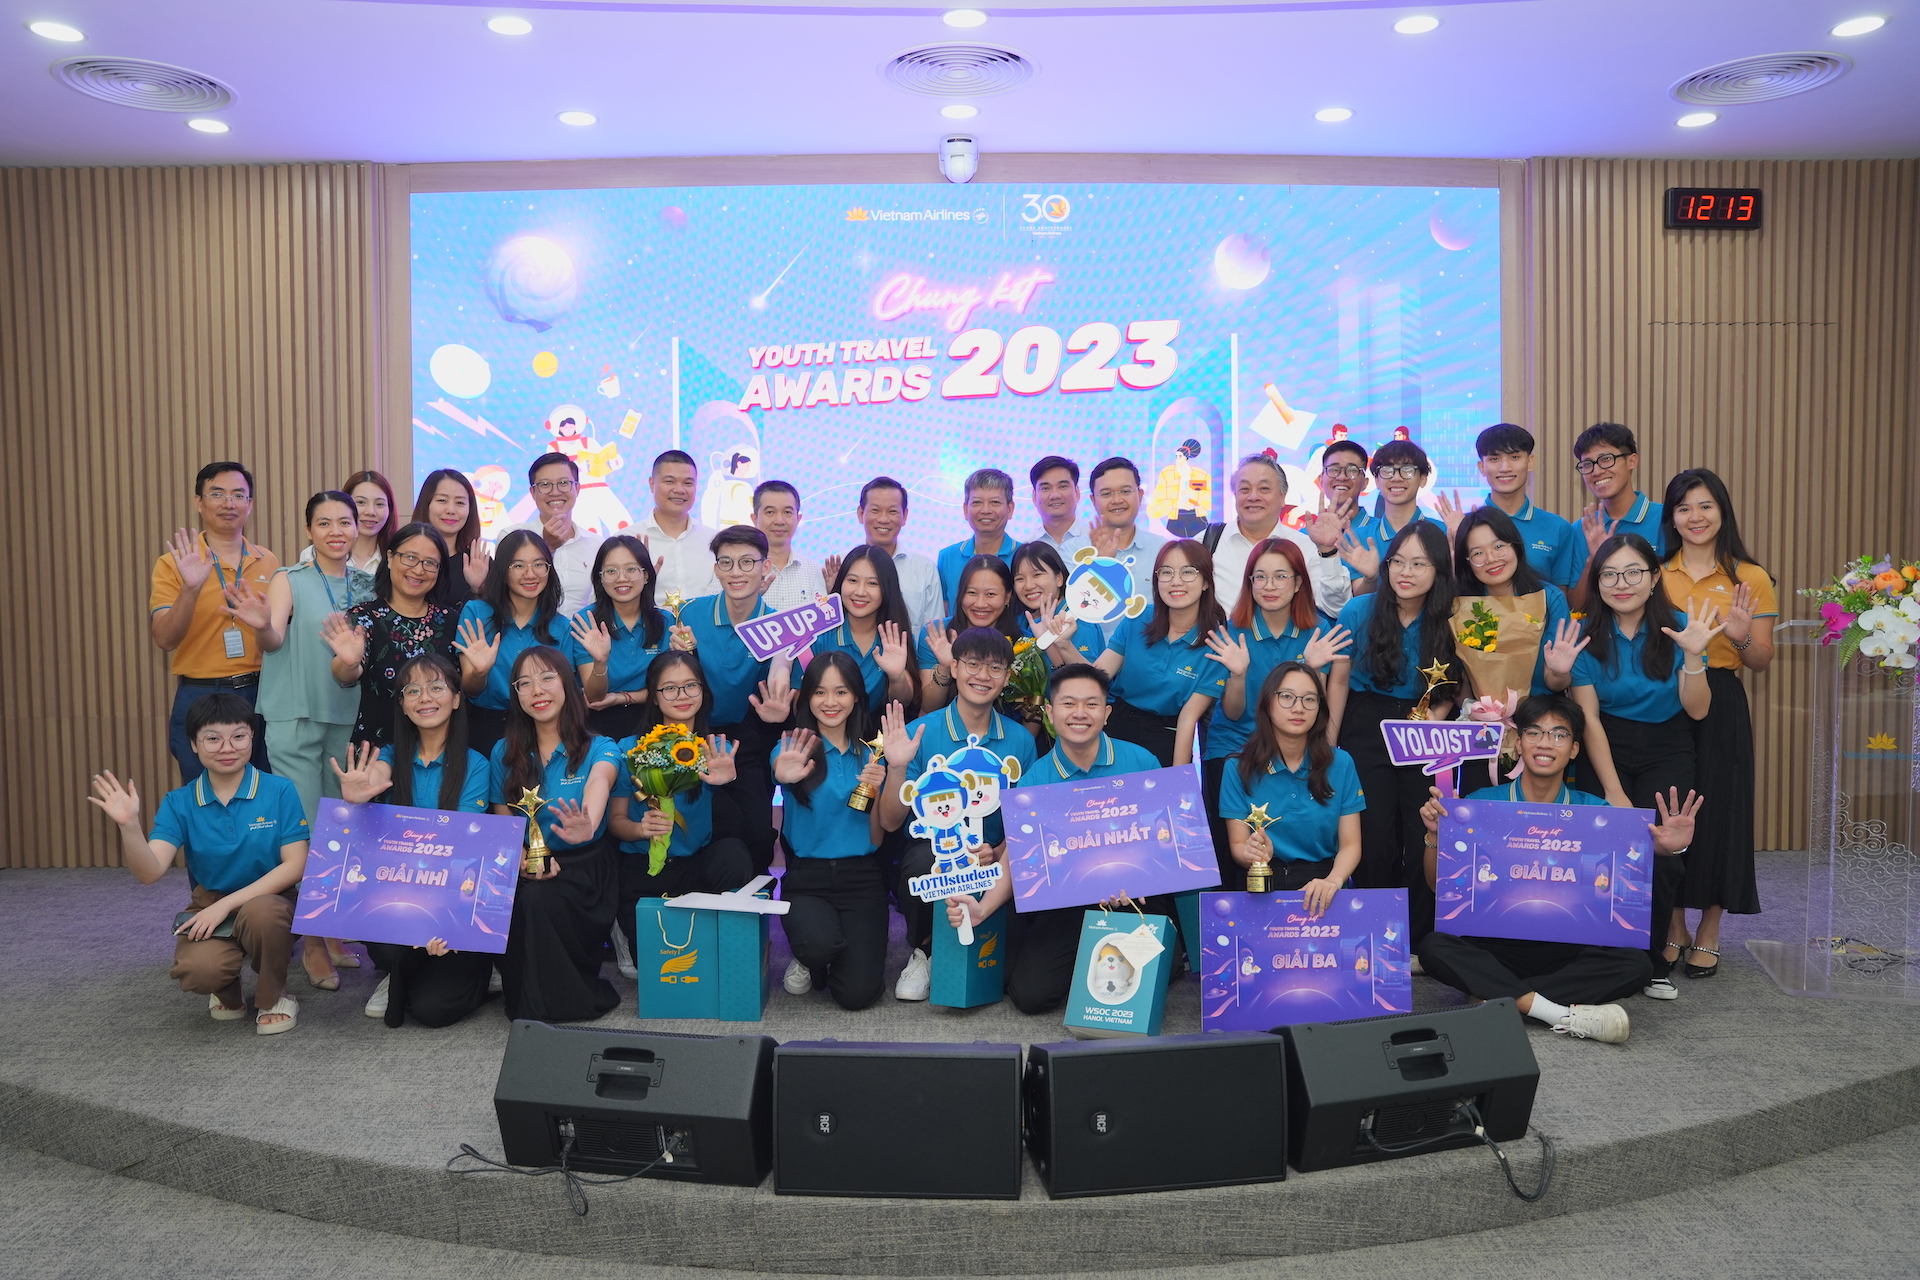 vietnam airlines youth travel awards 2023